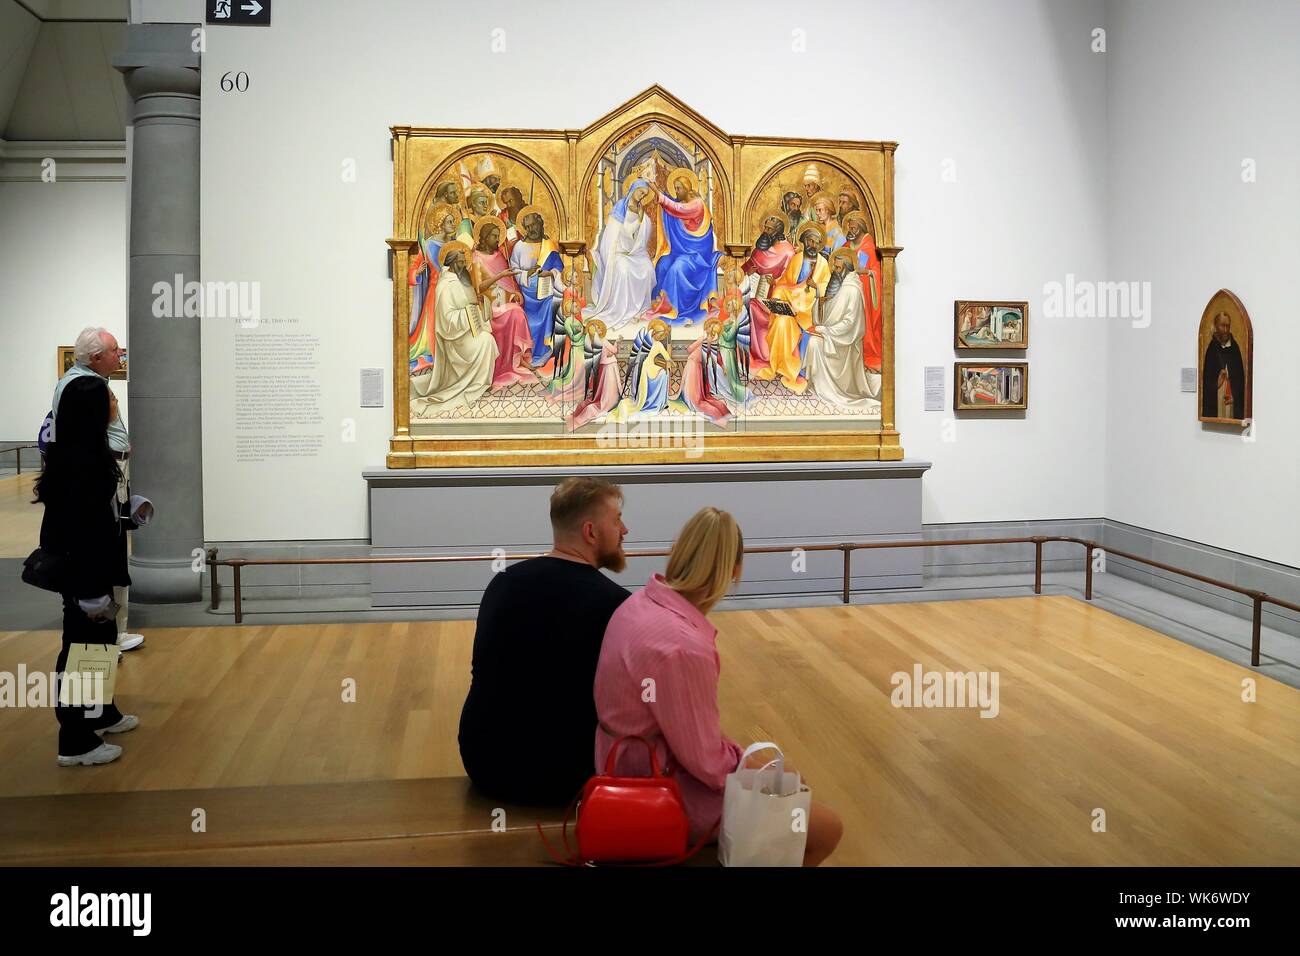 A young couple sitting in an exhibition area with a painting by Lorenzo Monaco in the background at the National Gallery, Trafalgar Square, London, UK Stock Photo